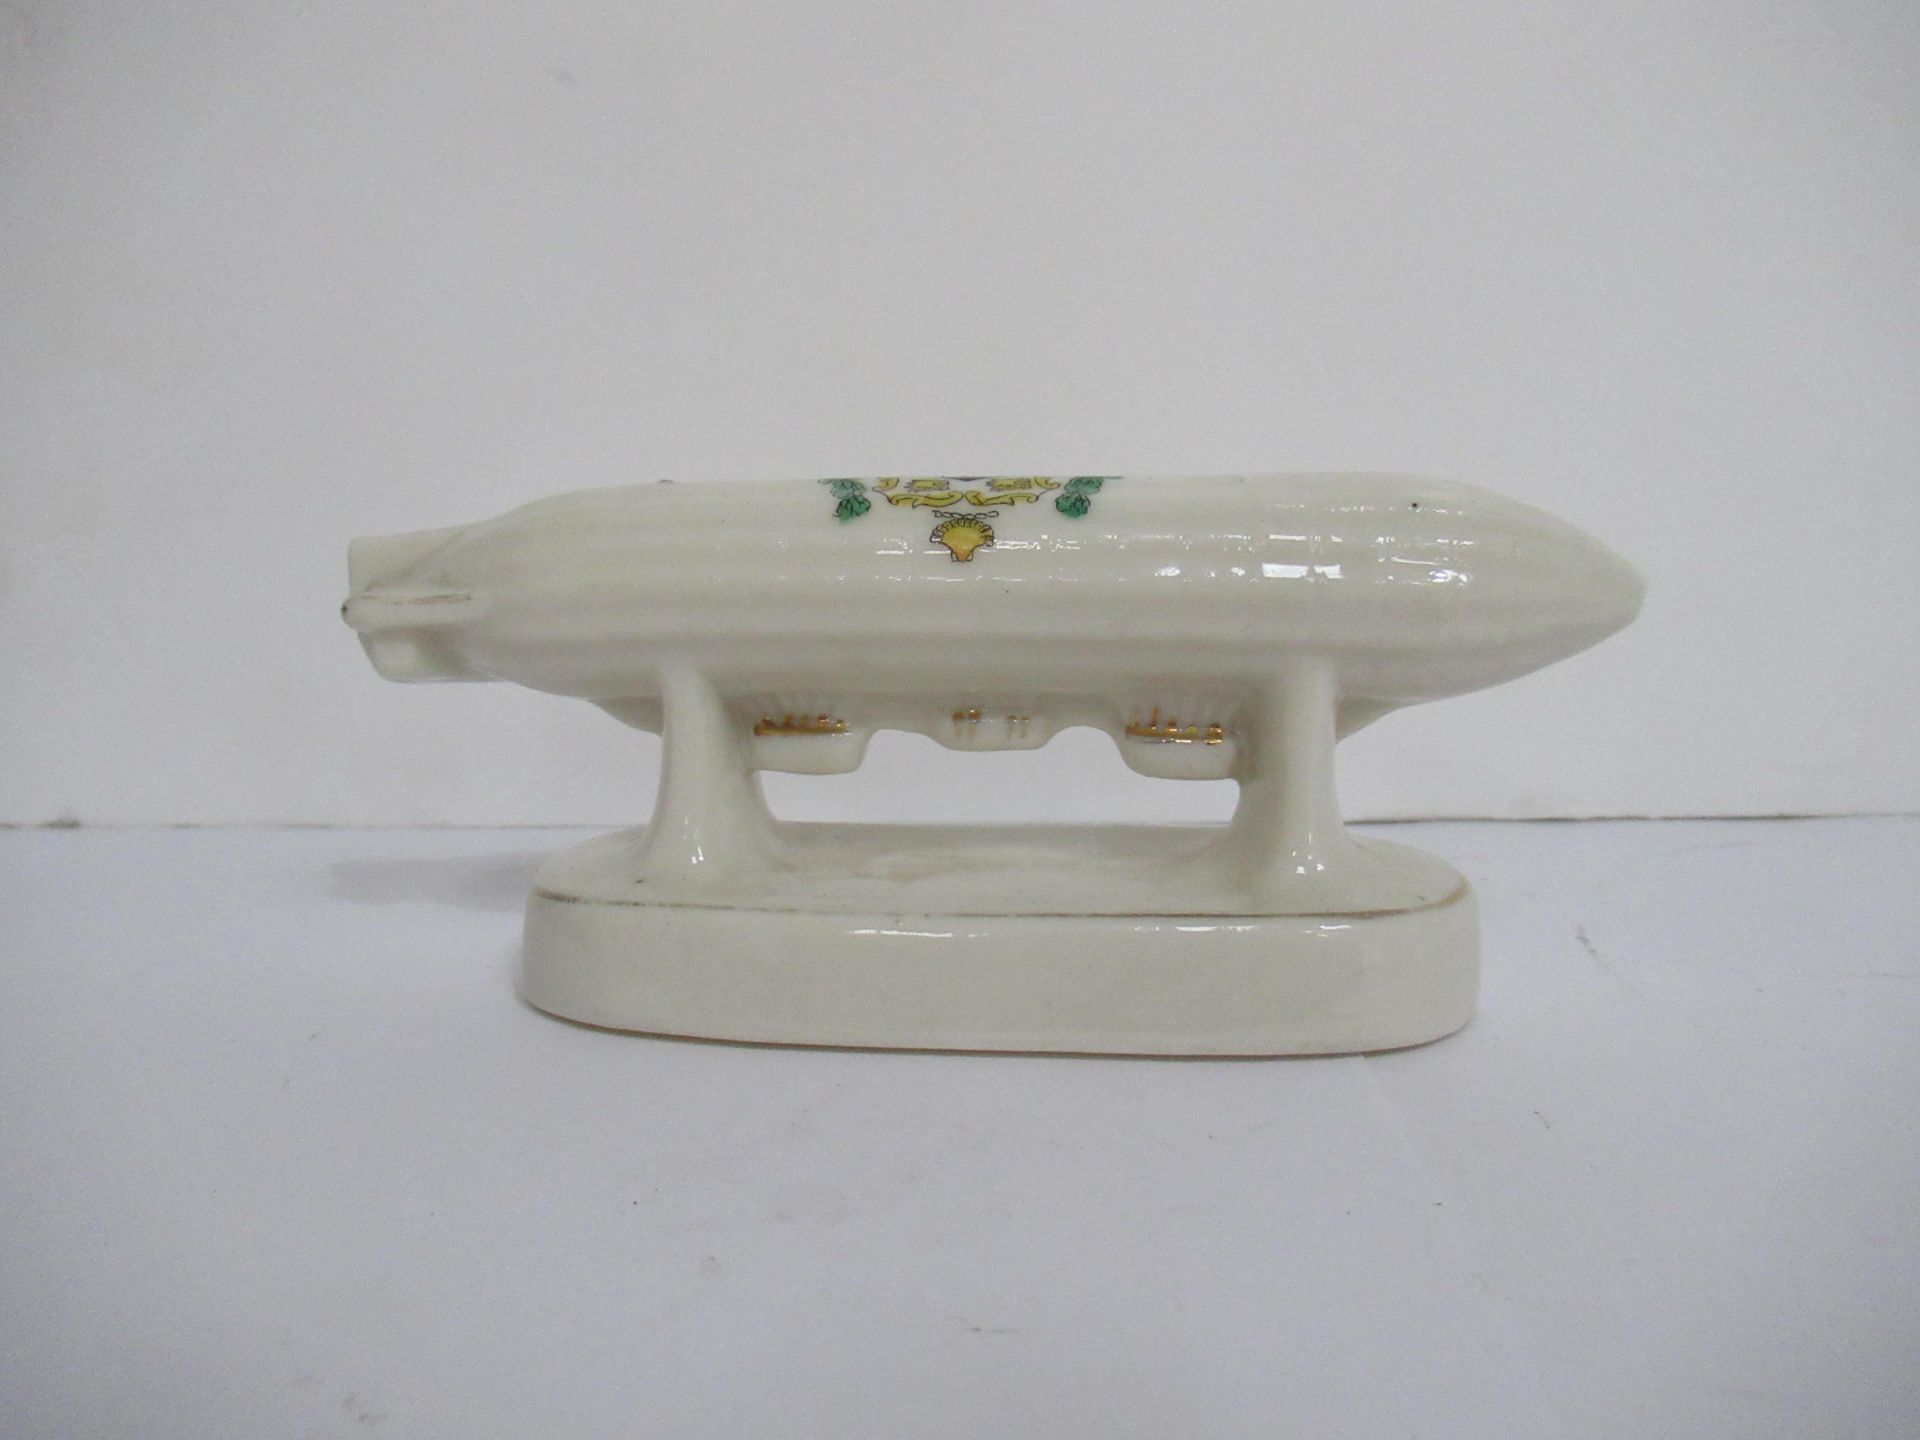 Crested China model of airship with Cleethorpes coat of arms (130mm x 55mm) - Image 3 of 8